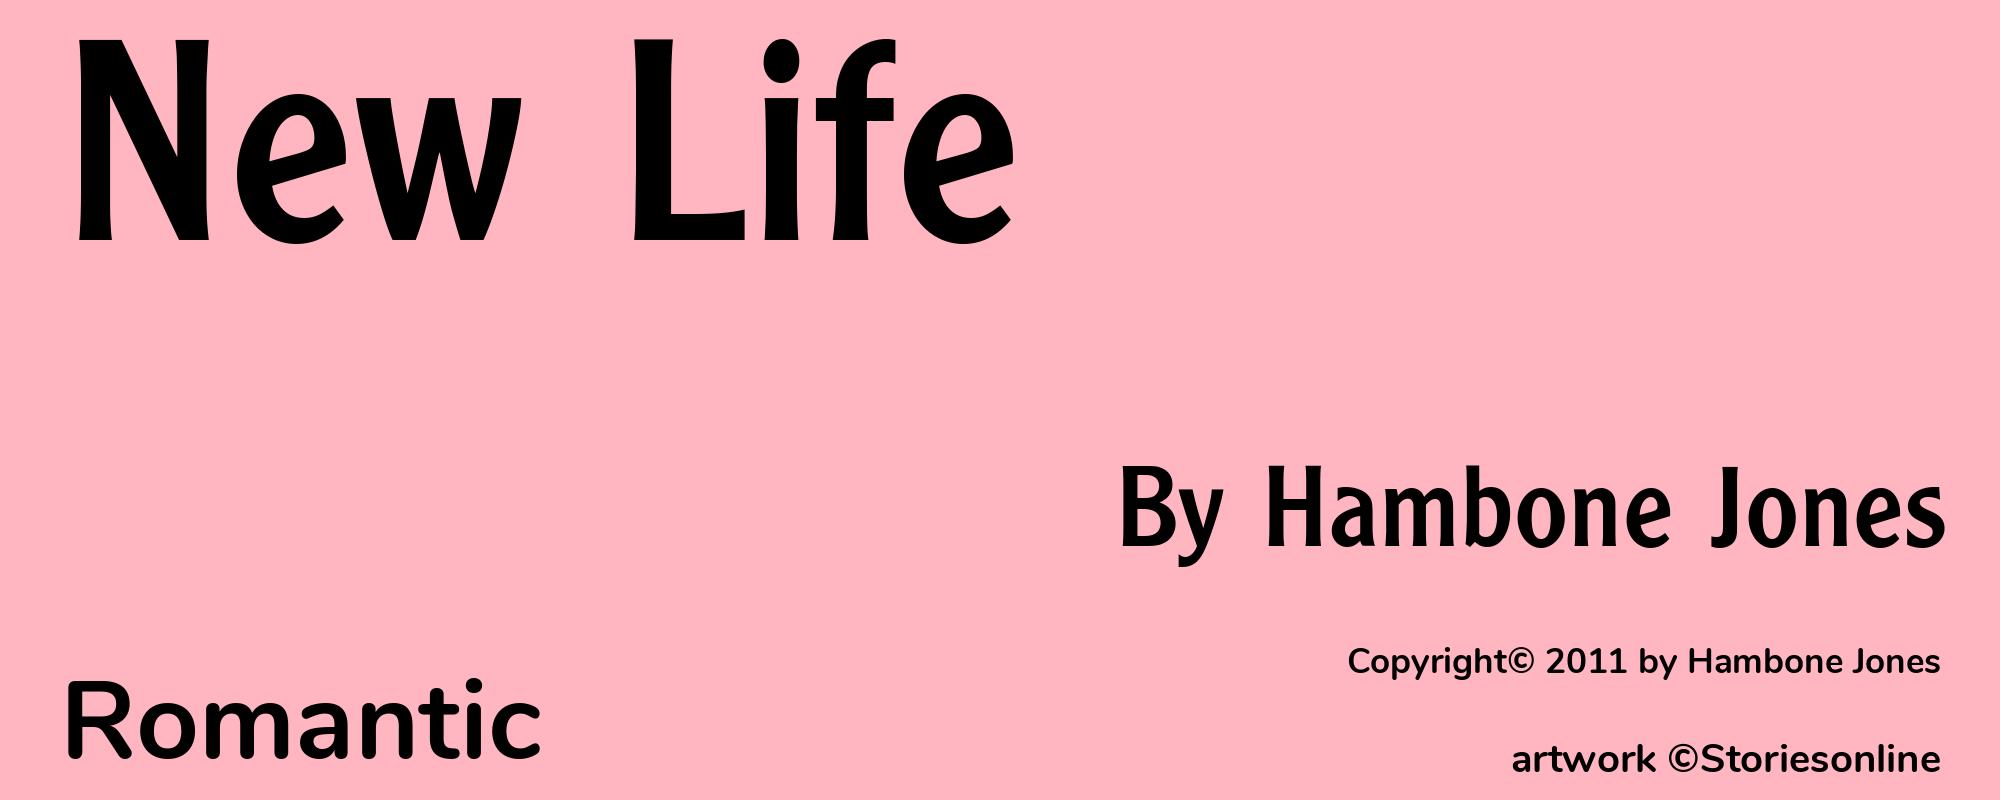 New Life - Cover